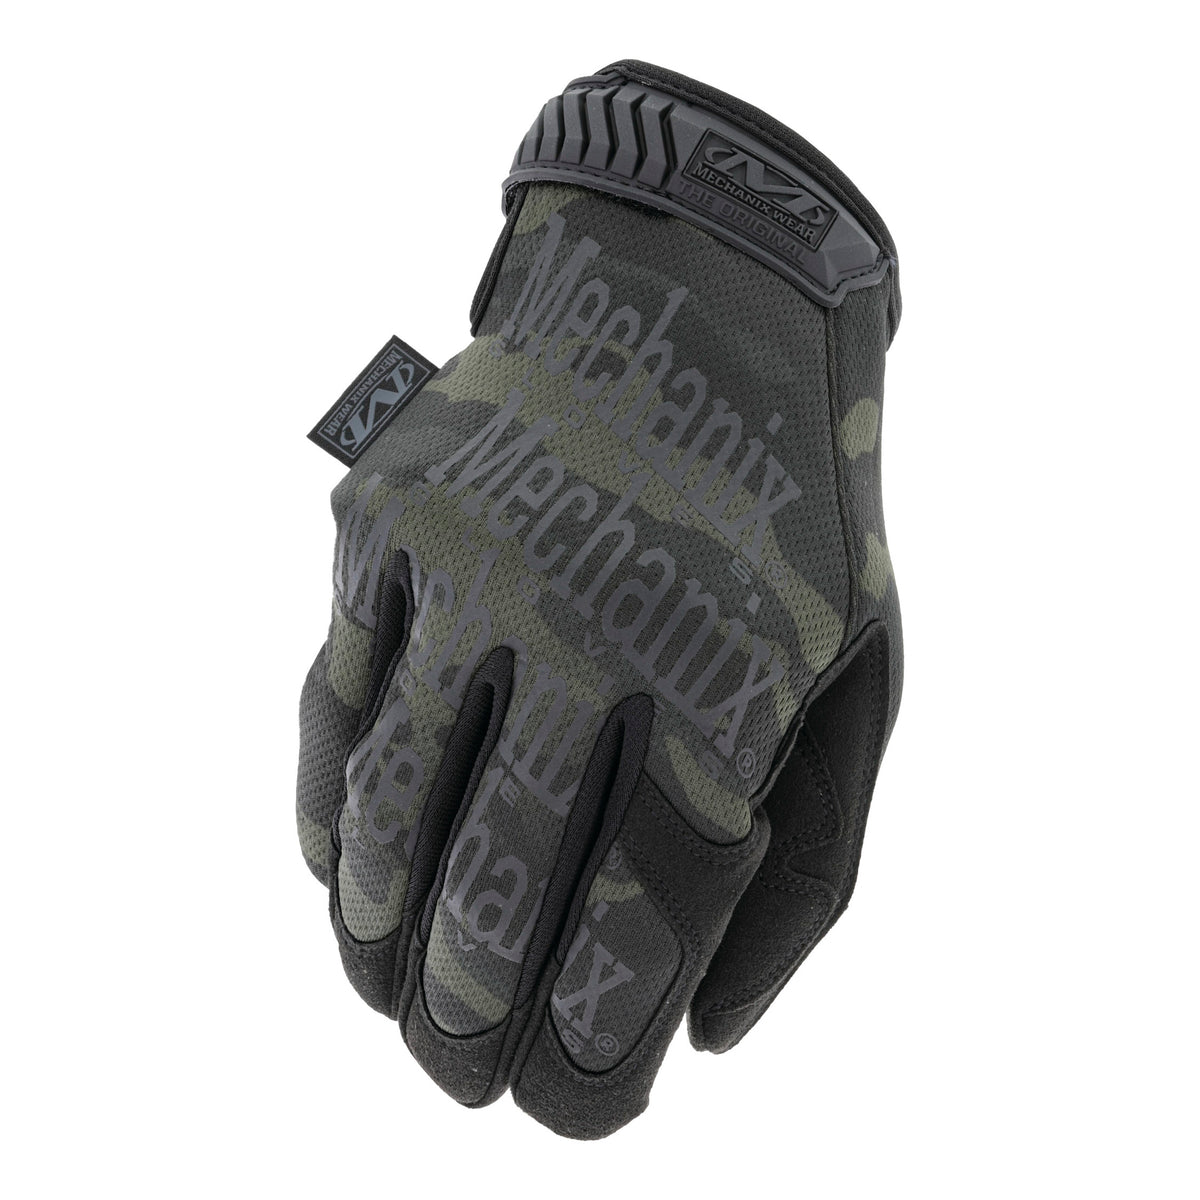 Mechanix Wear The Original Multicam Black Tactical Gloves with touchscreen-capable synthetic leather and breathable TrekDry material.